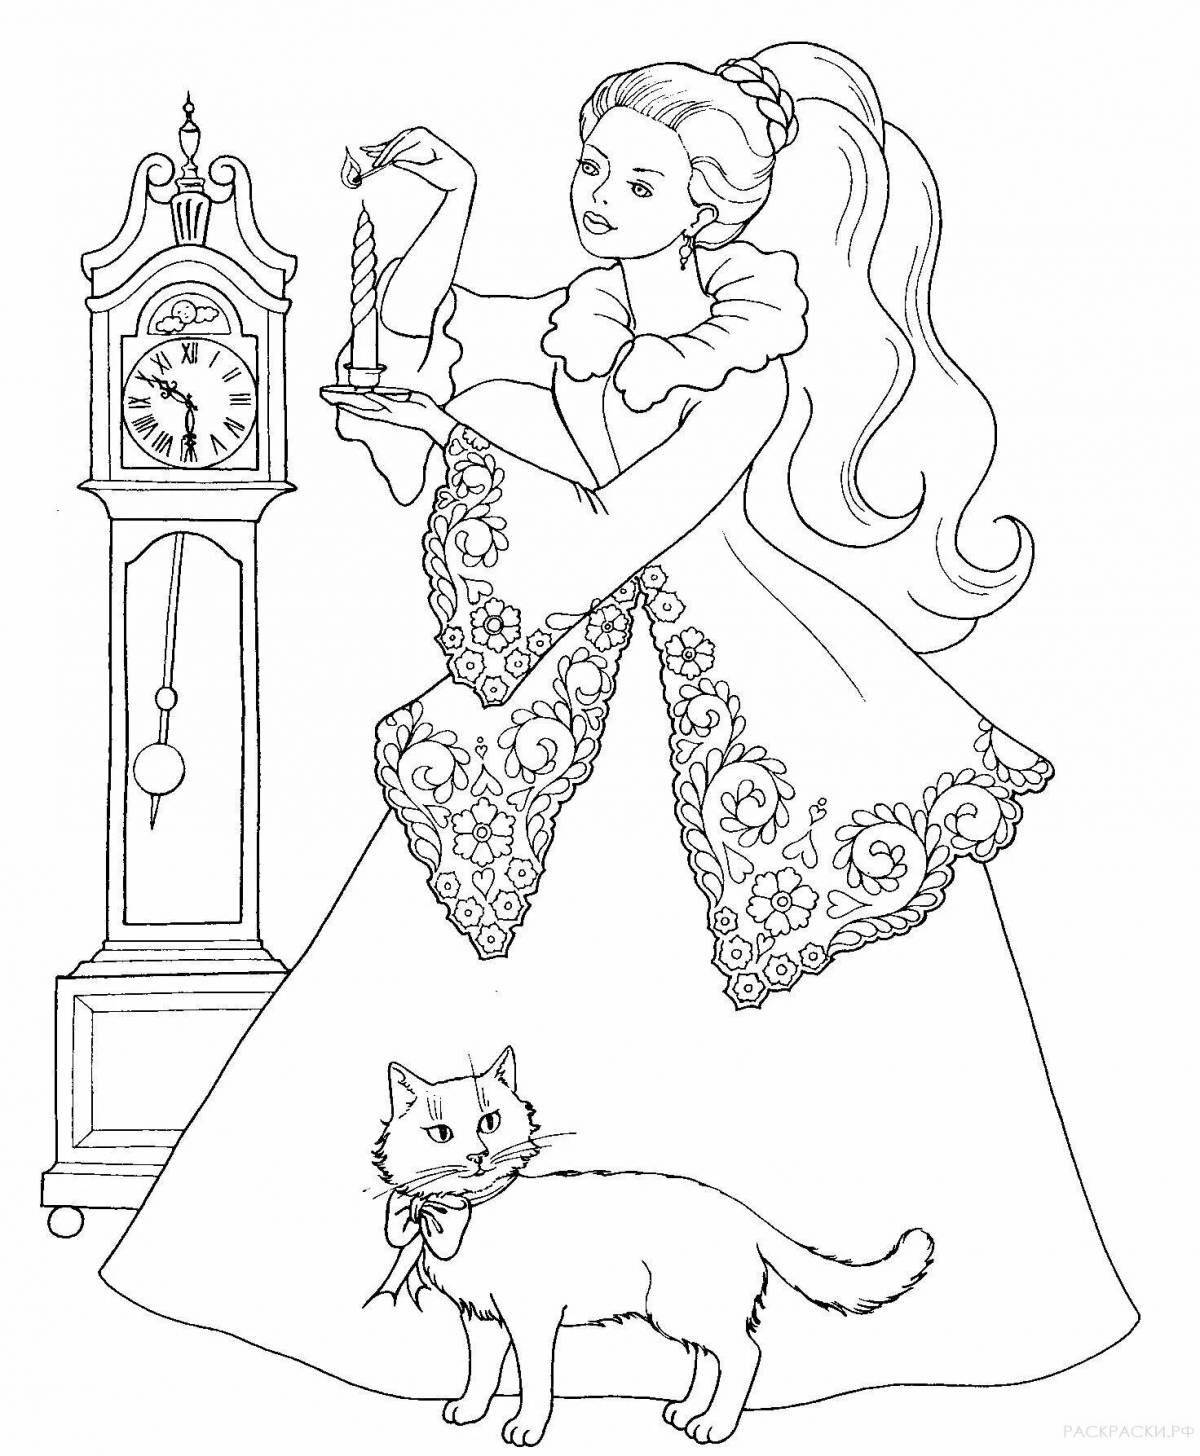 Amazing princess coloring pages for 6 year old girls